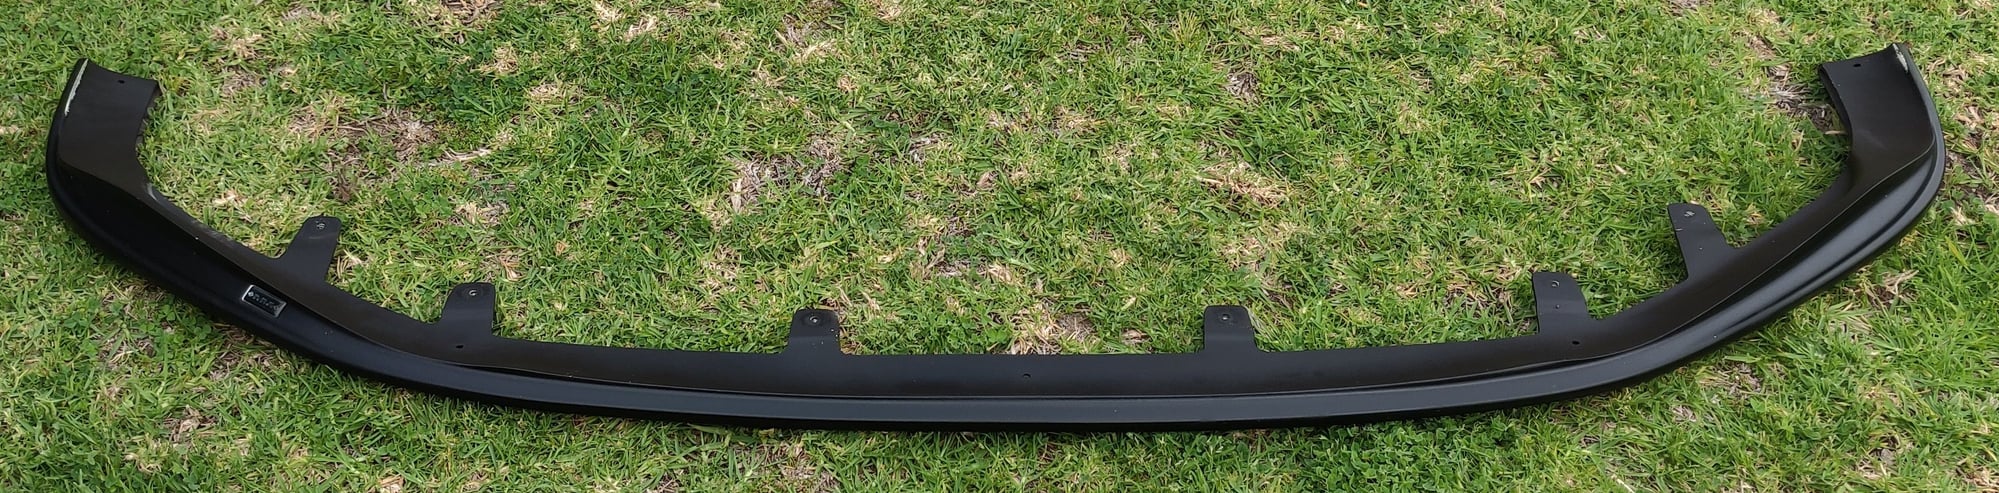 Exterior Body Parts - Skipper Lip Lexus IS 350 250 200t front spoiler 2014-2016 - Used - 2014 to 2016 Lexus IS200t - 2014 to 2016 Lexus IS250 - 2014 to 2016 Lexus IS350 - Temple City, CA 91780, United States